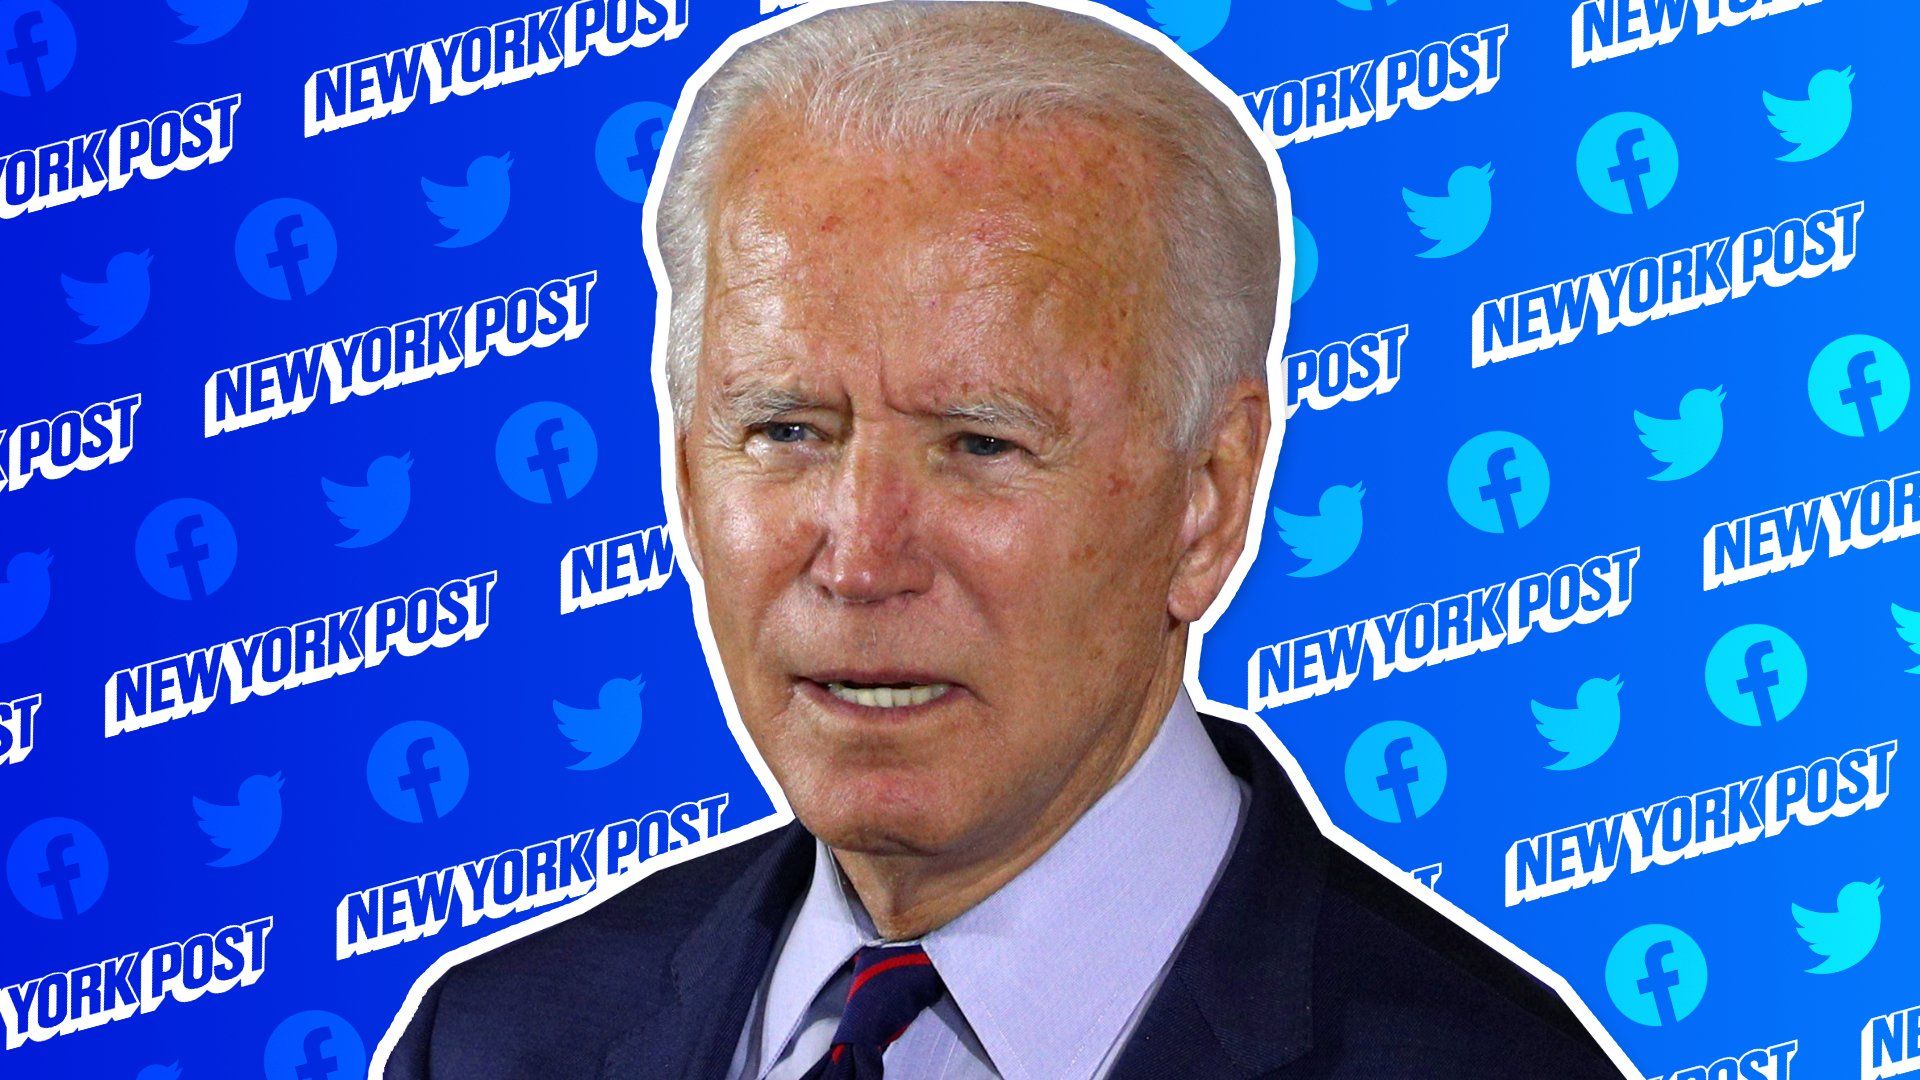 Twitter and Facebook's action over Joe Biden article reignites bias claims